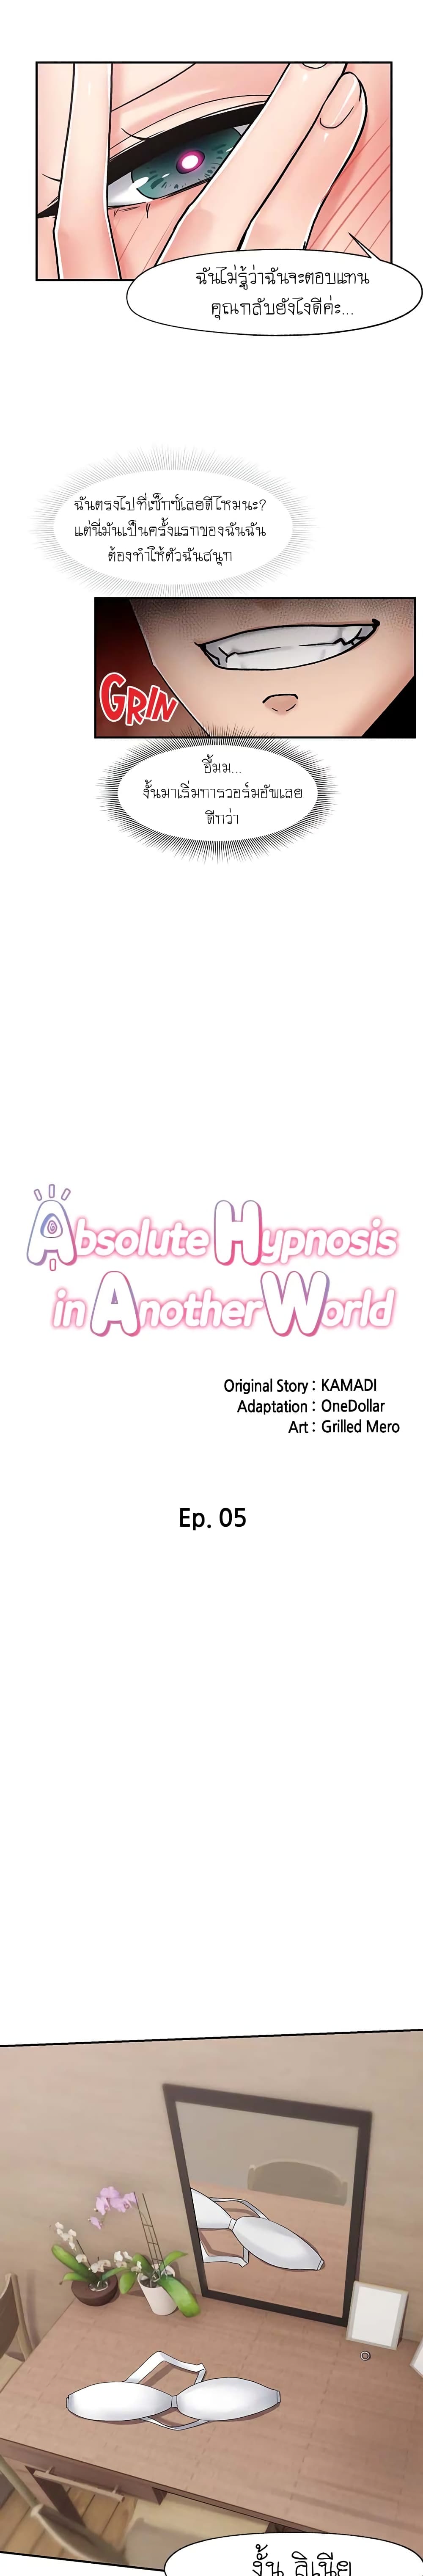 Absolute Hypnosis in Another World